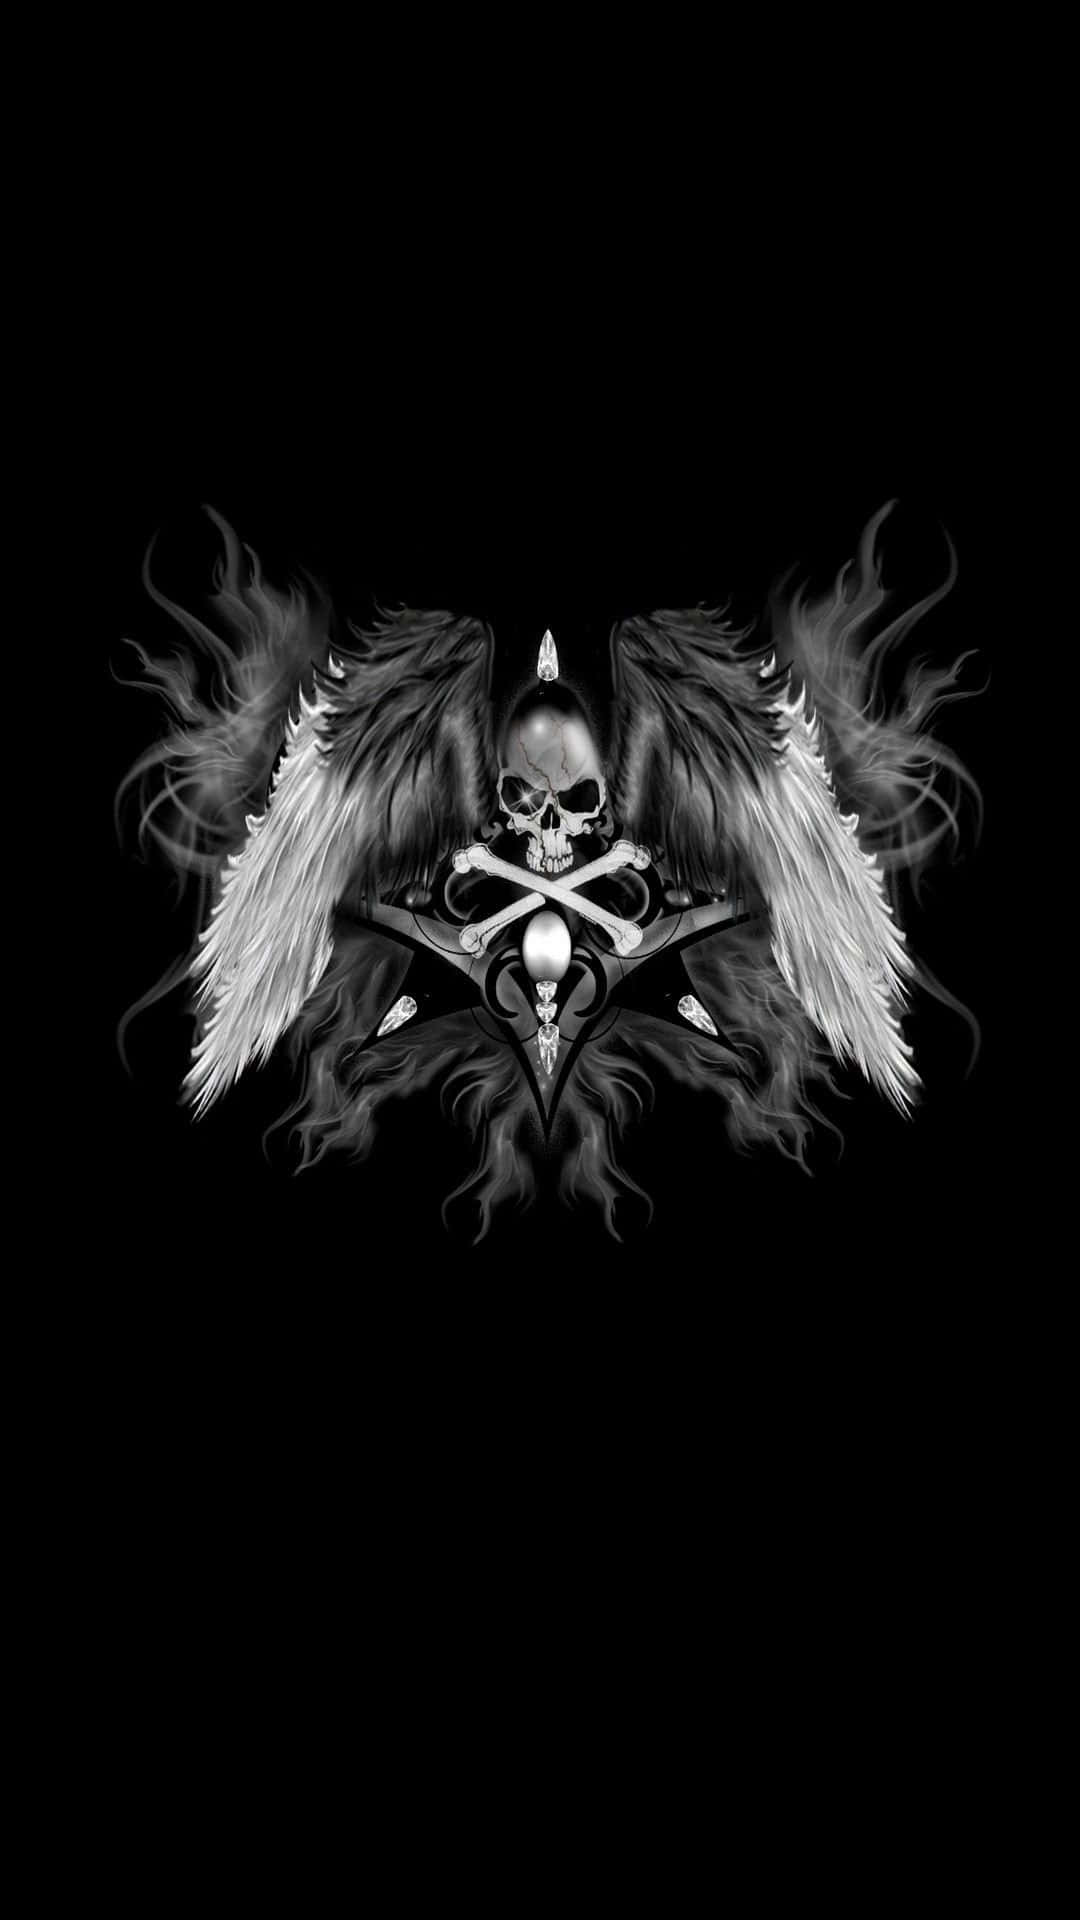 A Skull And Wings On A Black Background